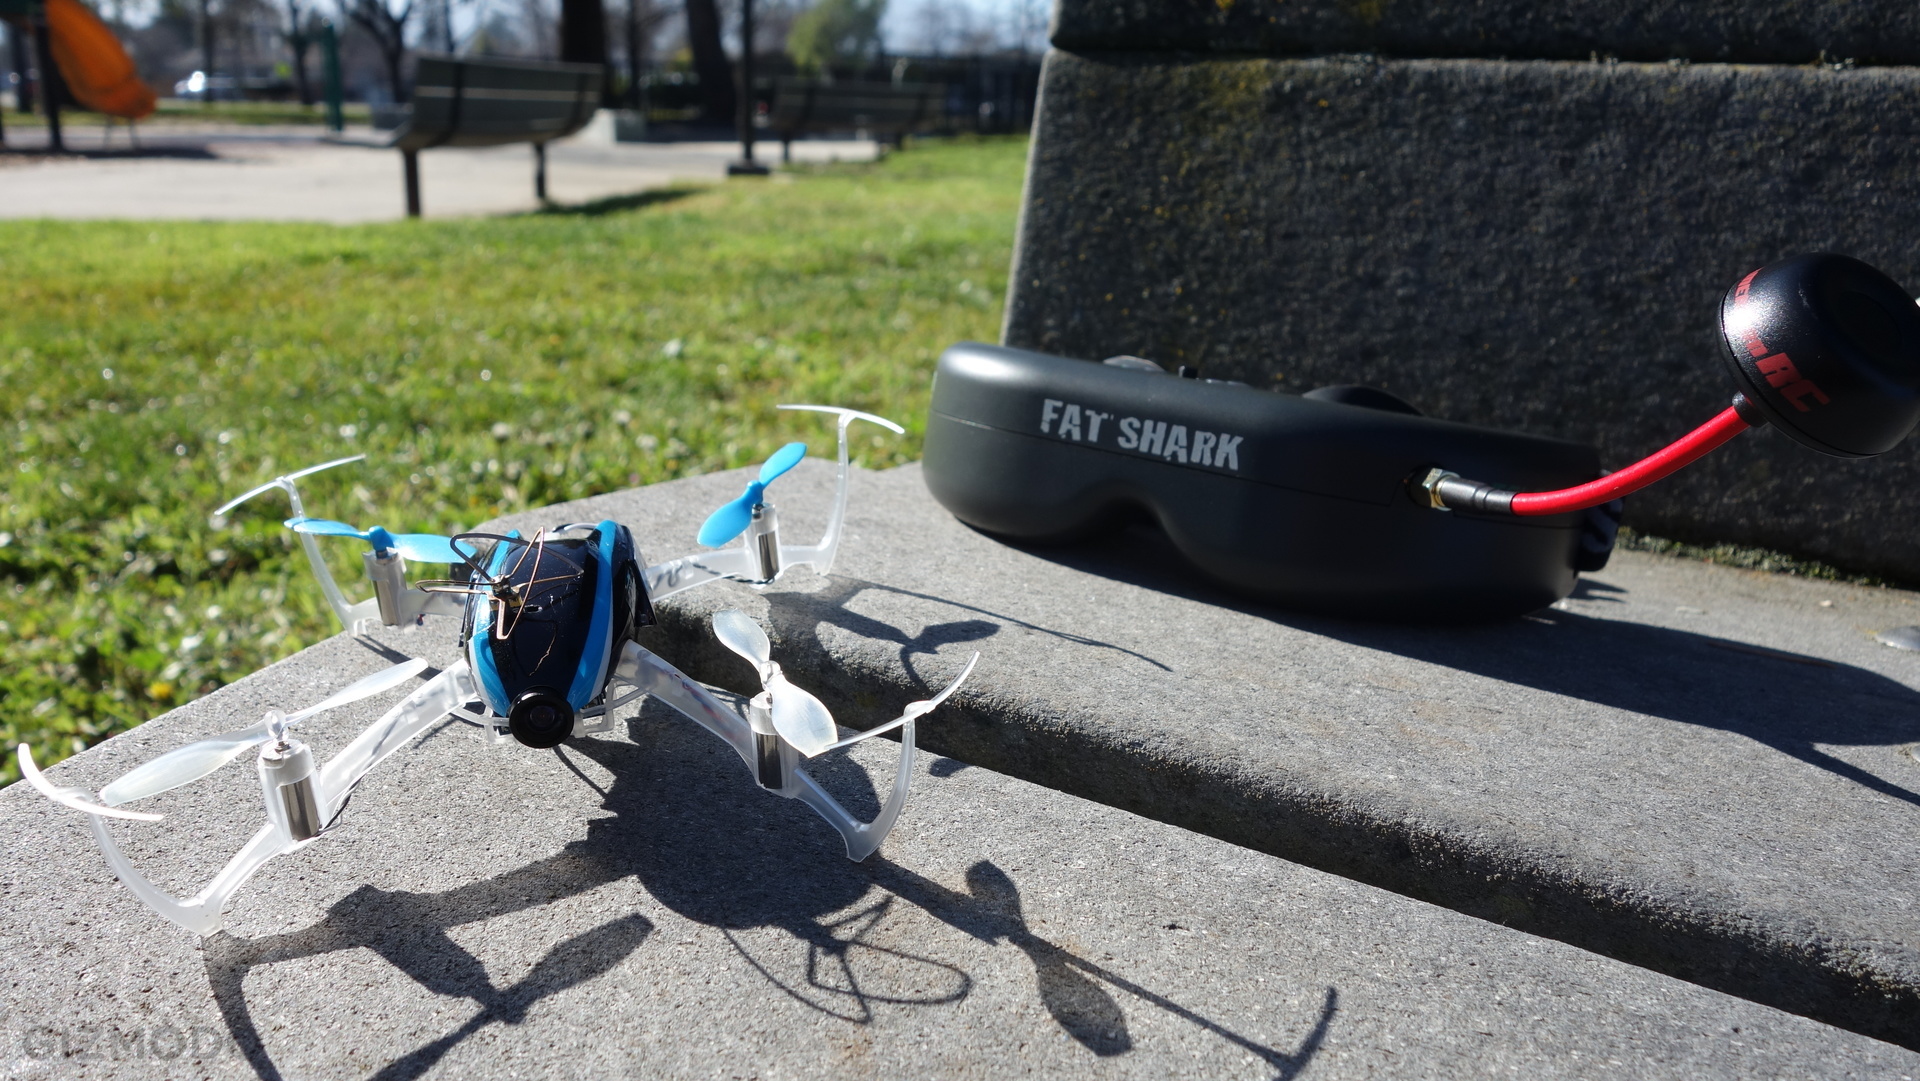 Blade Nano QX Drone Review: An Out-of-Body Experience